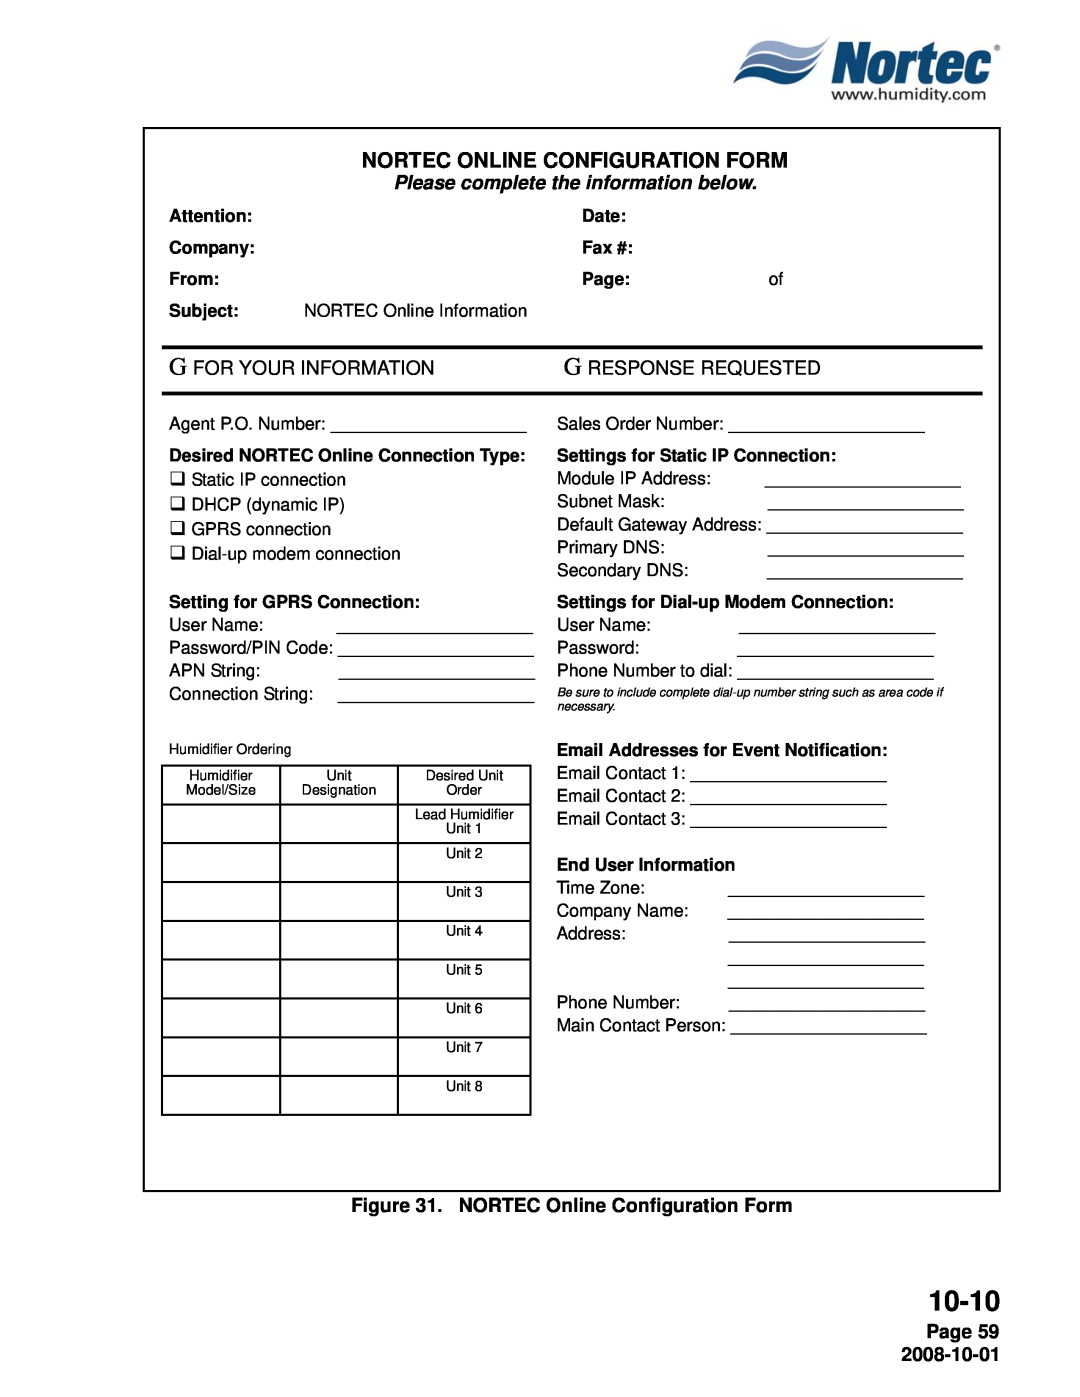 Nortec NHTC, NHPC manual 10-10, Nortec Online Configuration Form, G For Your Information, G Response Requested, Page 59 